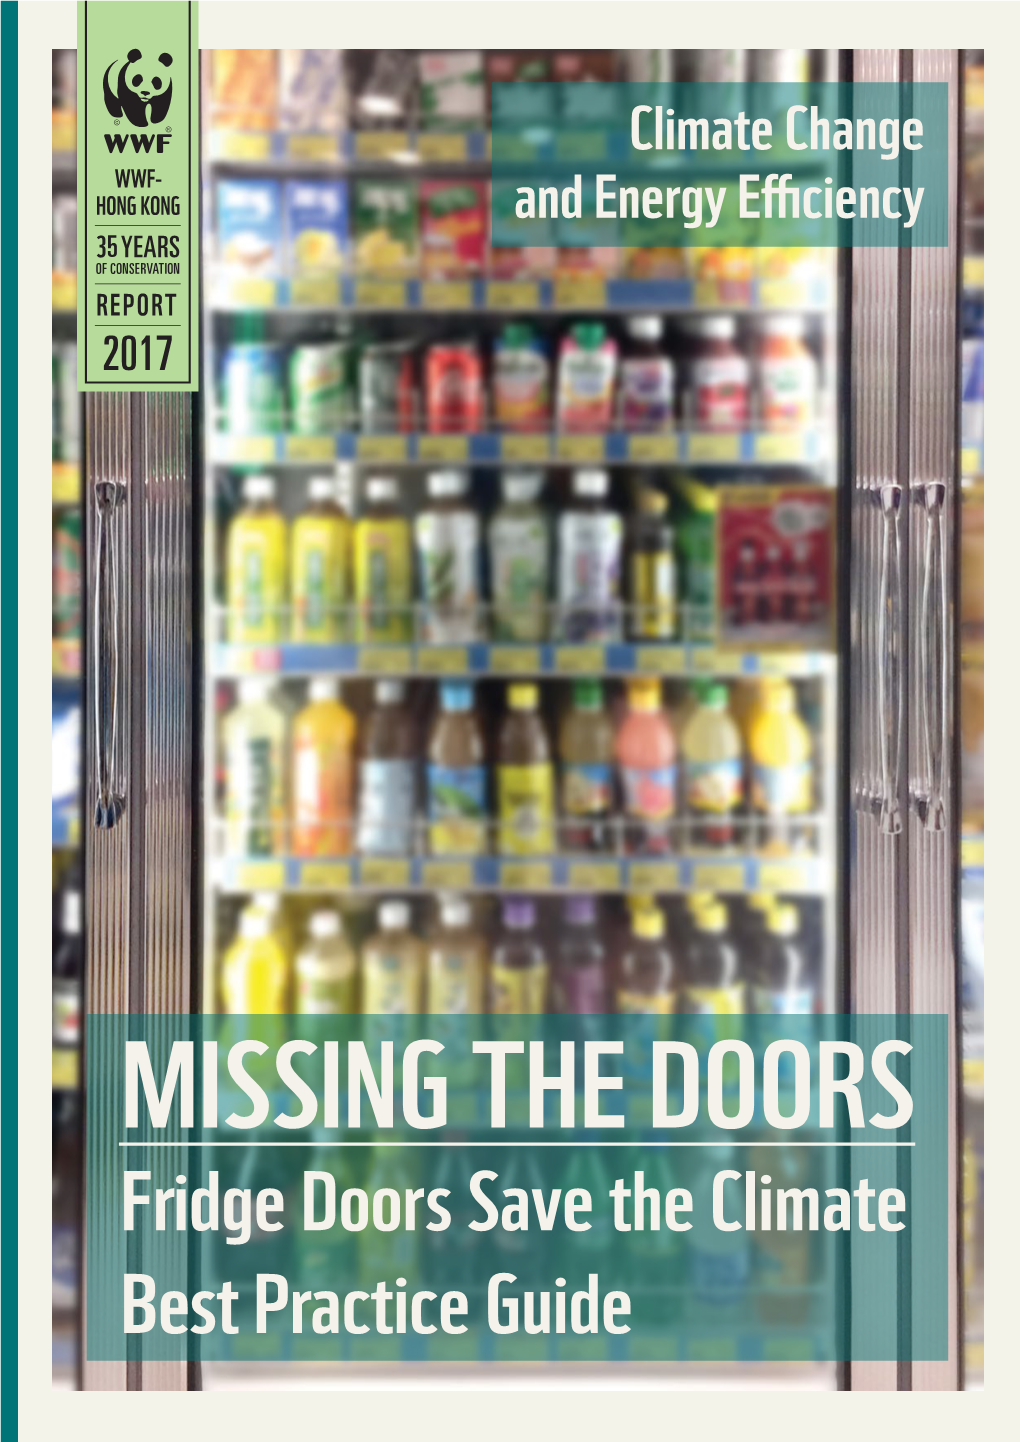 Fridge Doors Save the Climate Best Practice Guide